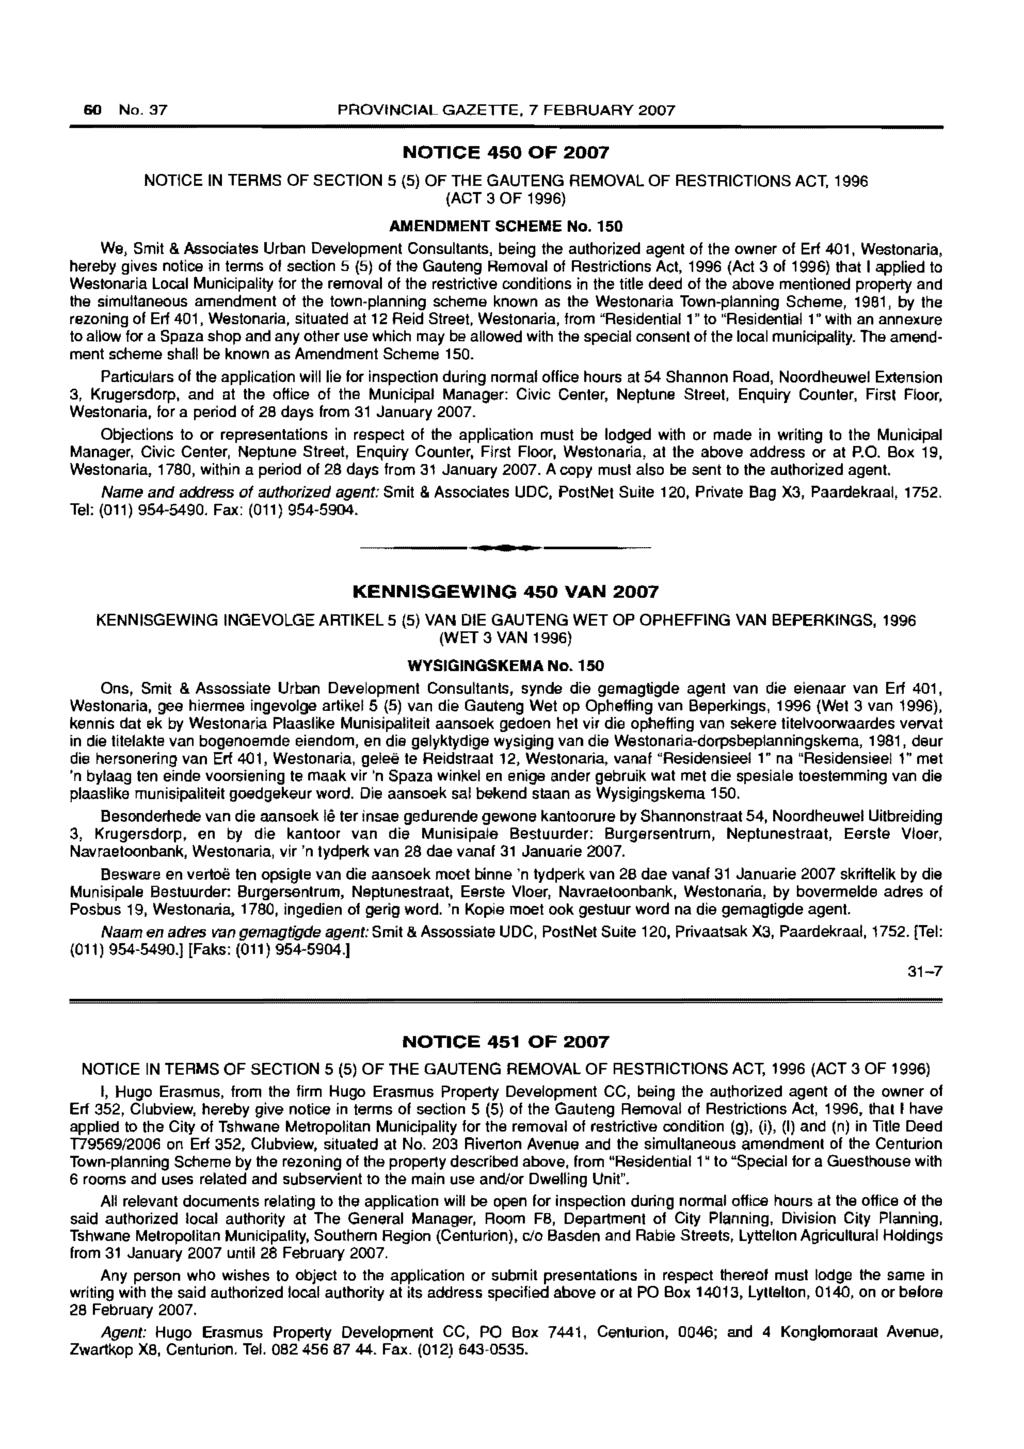 60 No. 37 PROVINCIAL GAZETTE, 7 FEBRUARY 2007 NOTICE 450 OF 2007 NOTICE IN TERMS OF SECTION 5 (5) OF THE GAUTENG REMOVAL OF RESTRICTIONS ACT, 1996 (ACT 3 OF 1996) AMENDMENT SCHEME No.